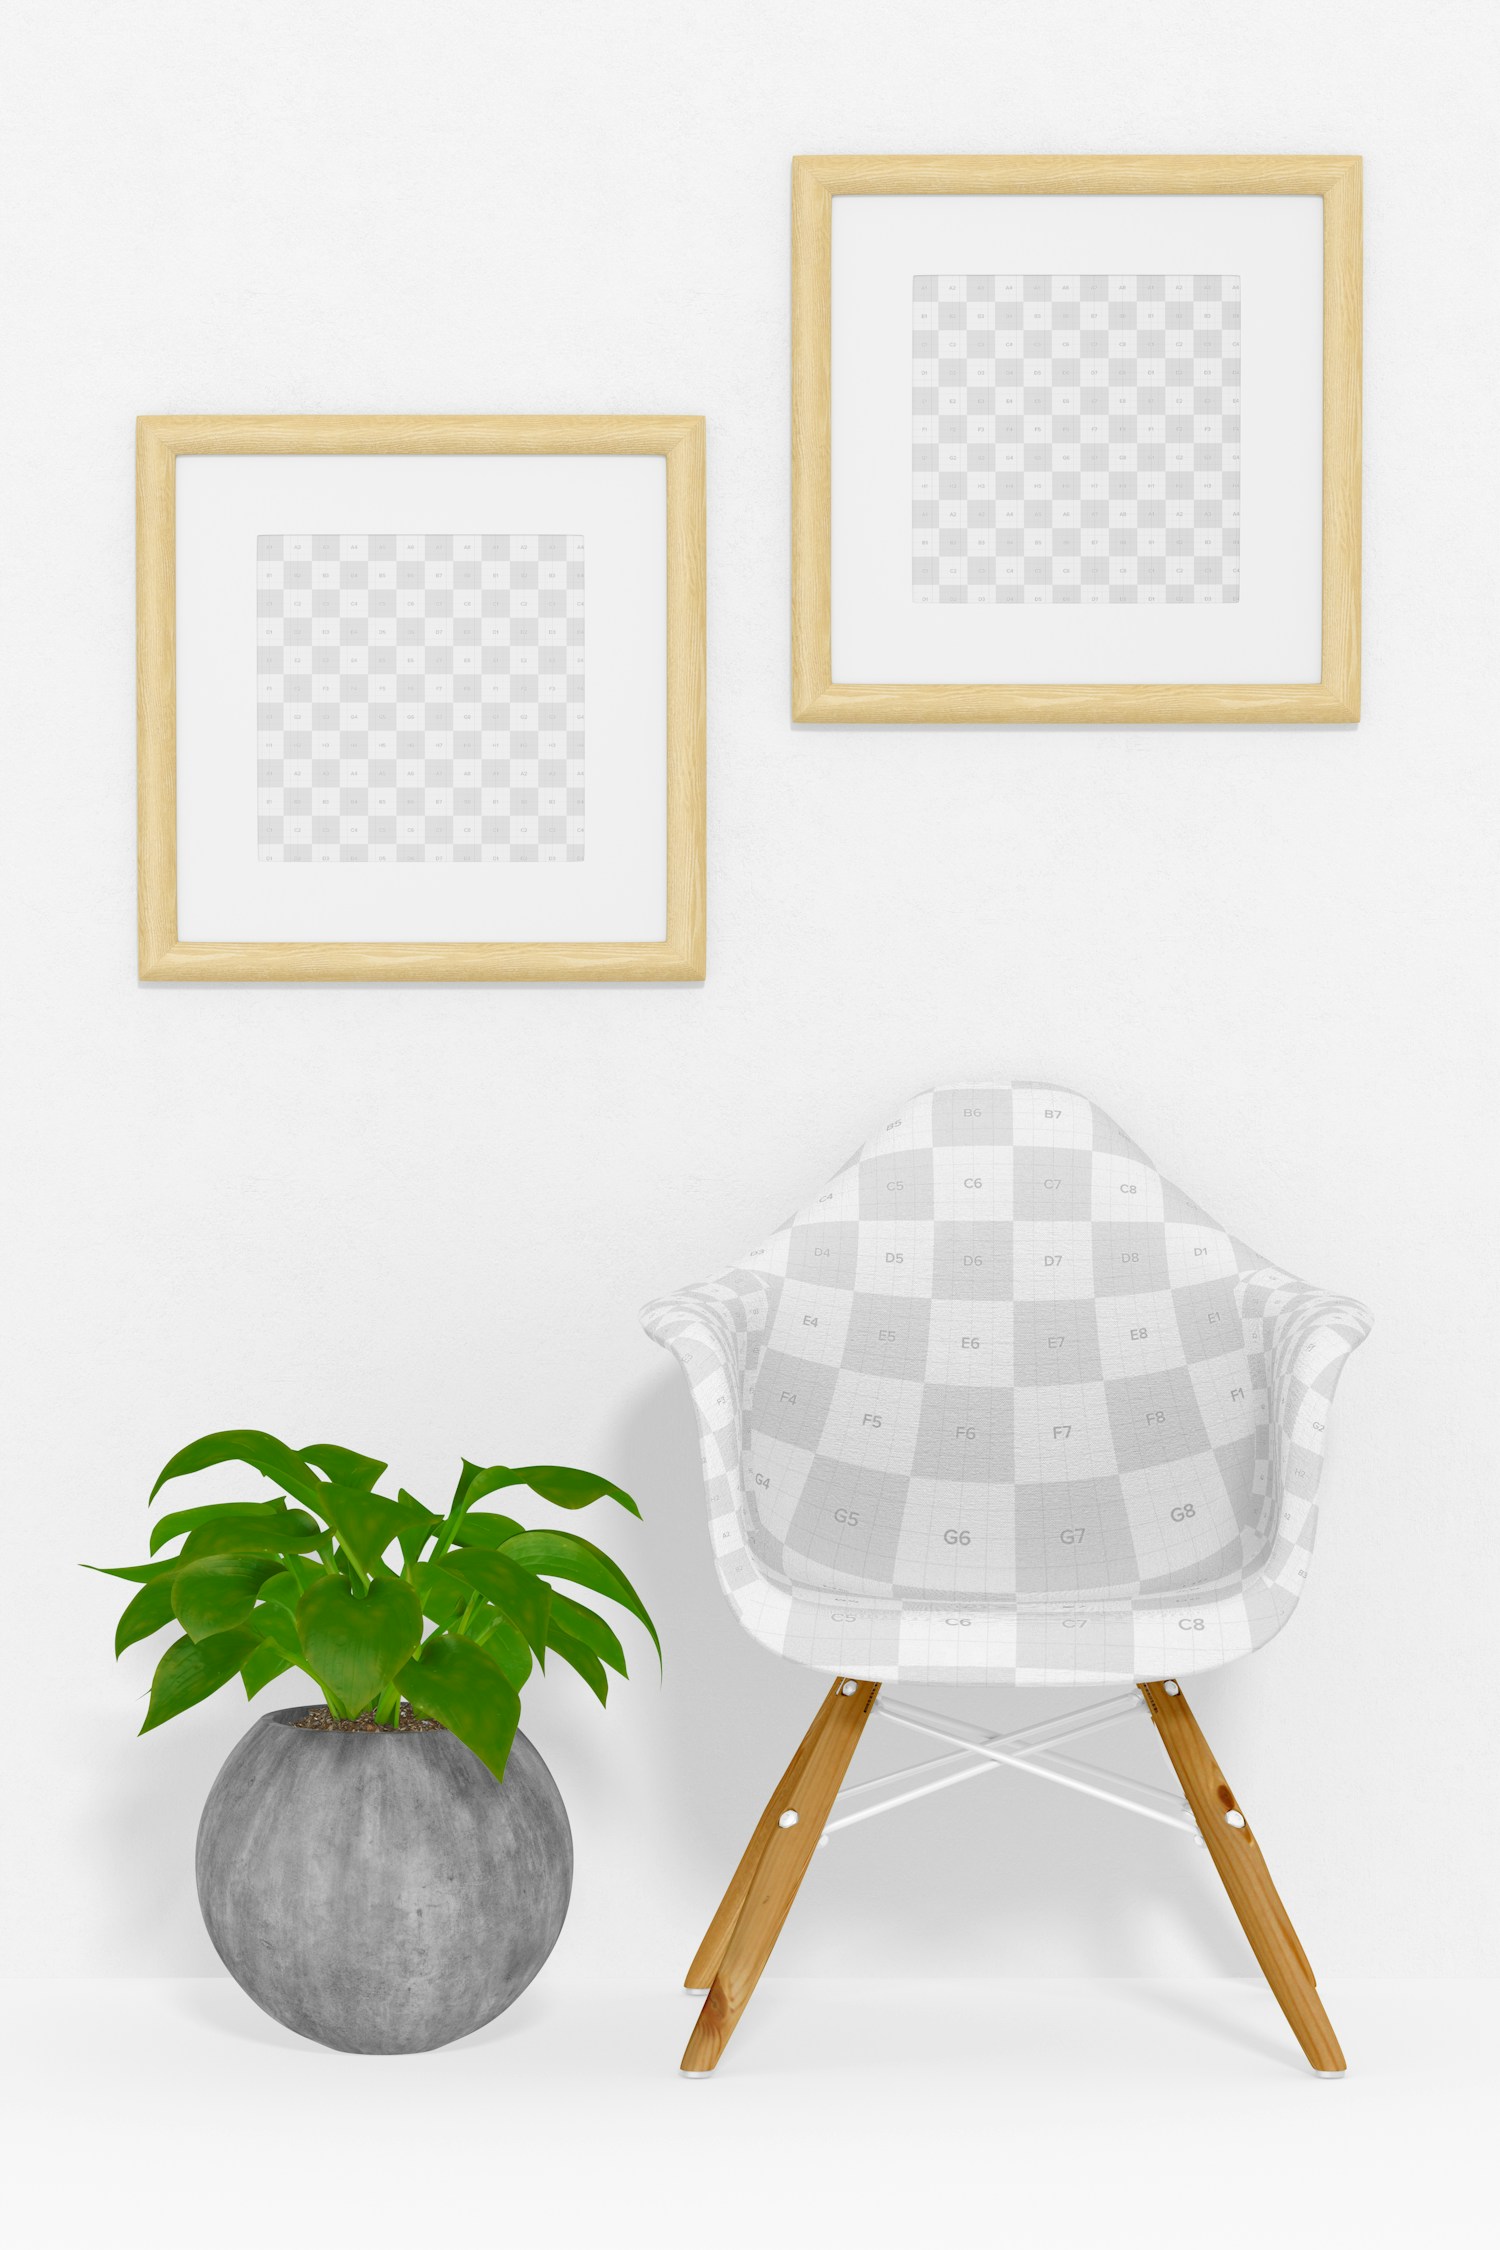 Square Frames with Fabric Chair Mockup